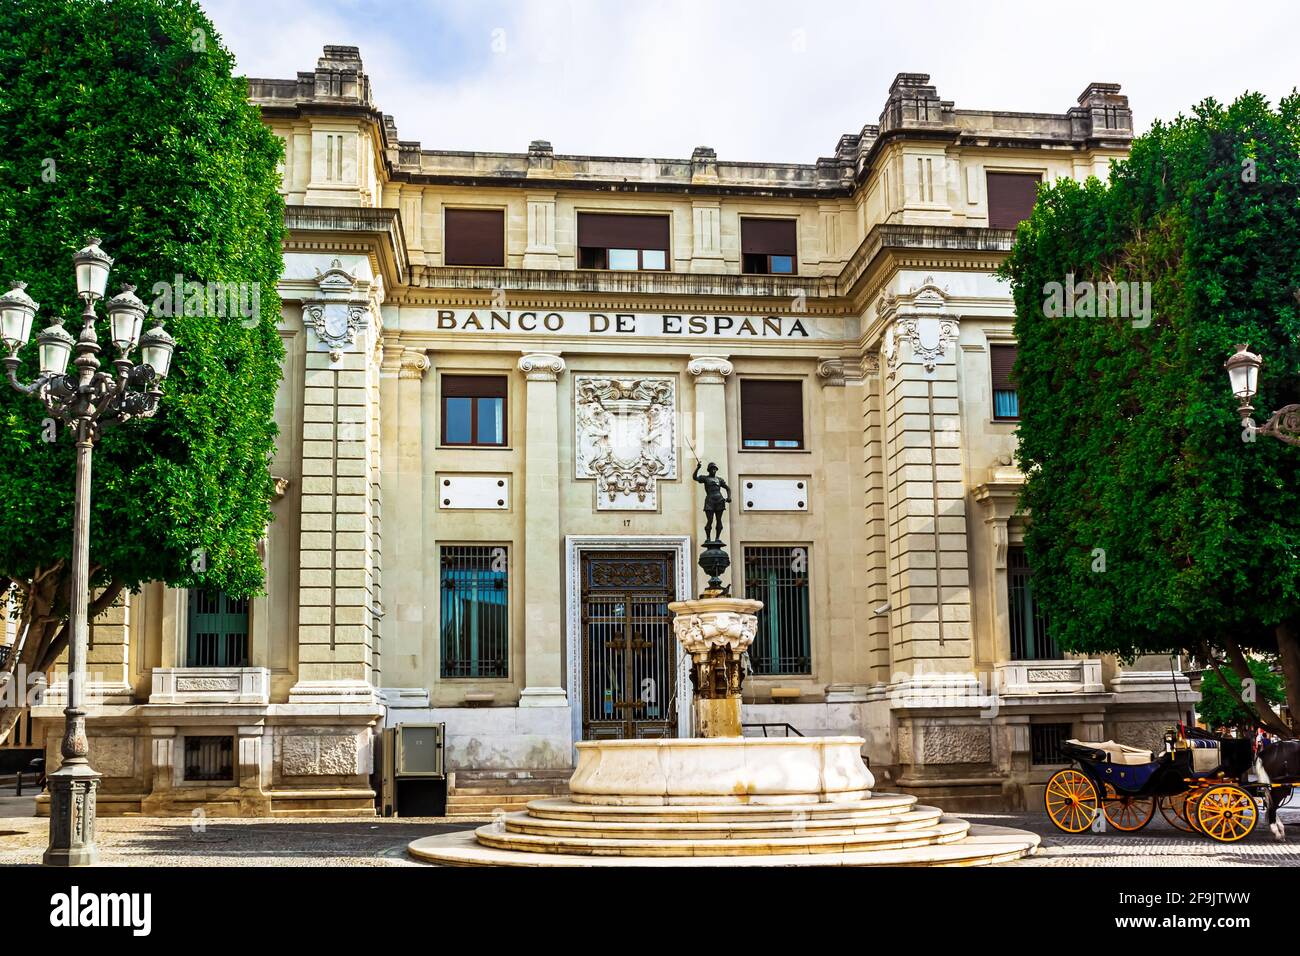 Seville, Andalusia, Spain - May 12, 2013: The building of the Bank of Spain with the mercury fountain in the square of St. Francis. Stock Photo